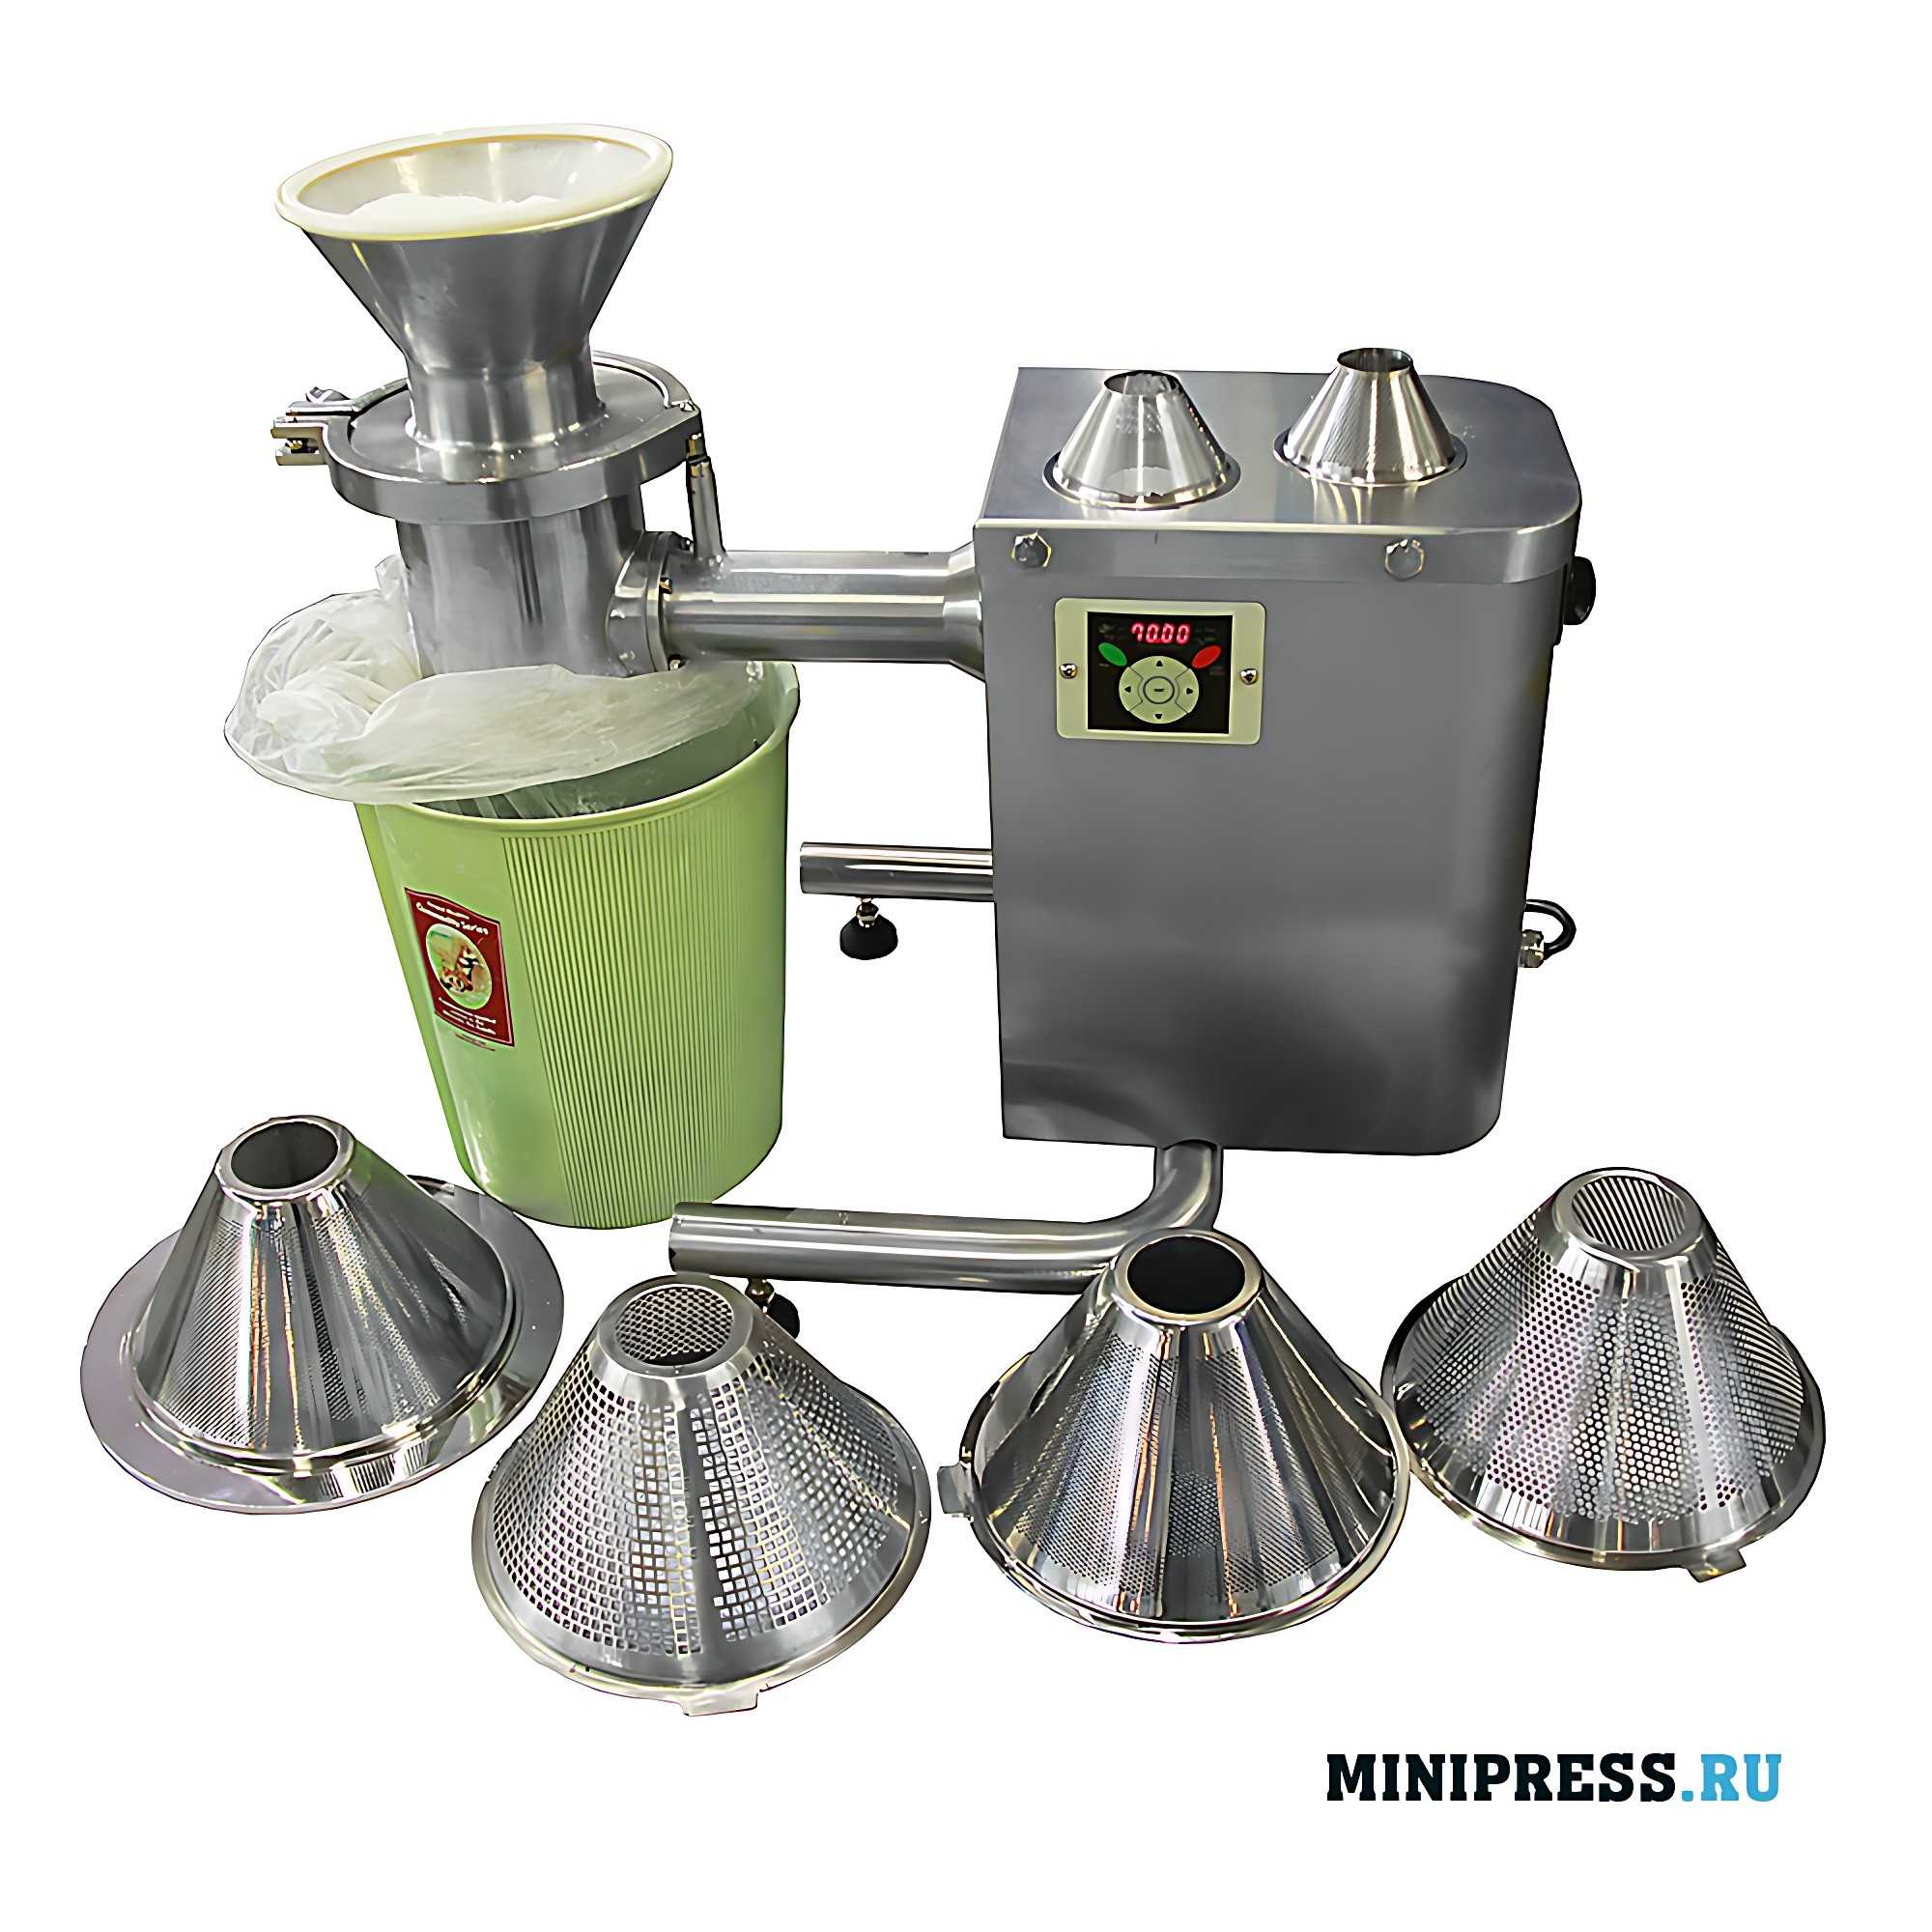 Grinding mill for substandard tablets RW-06